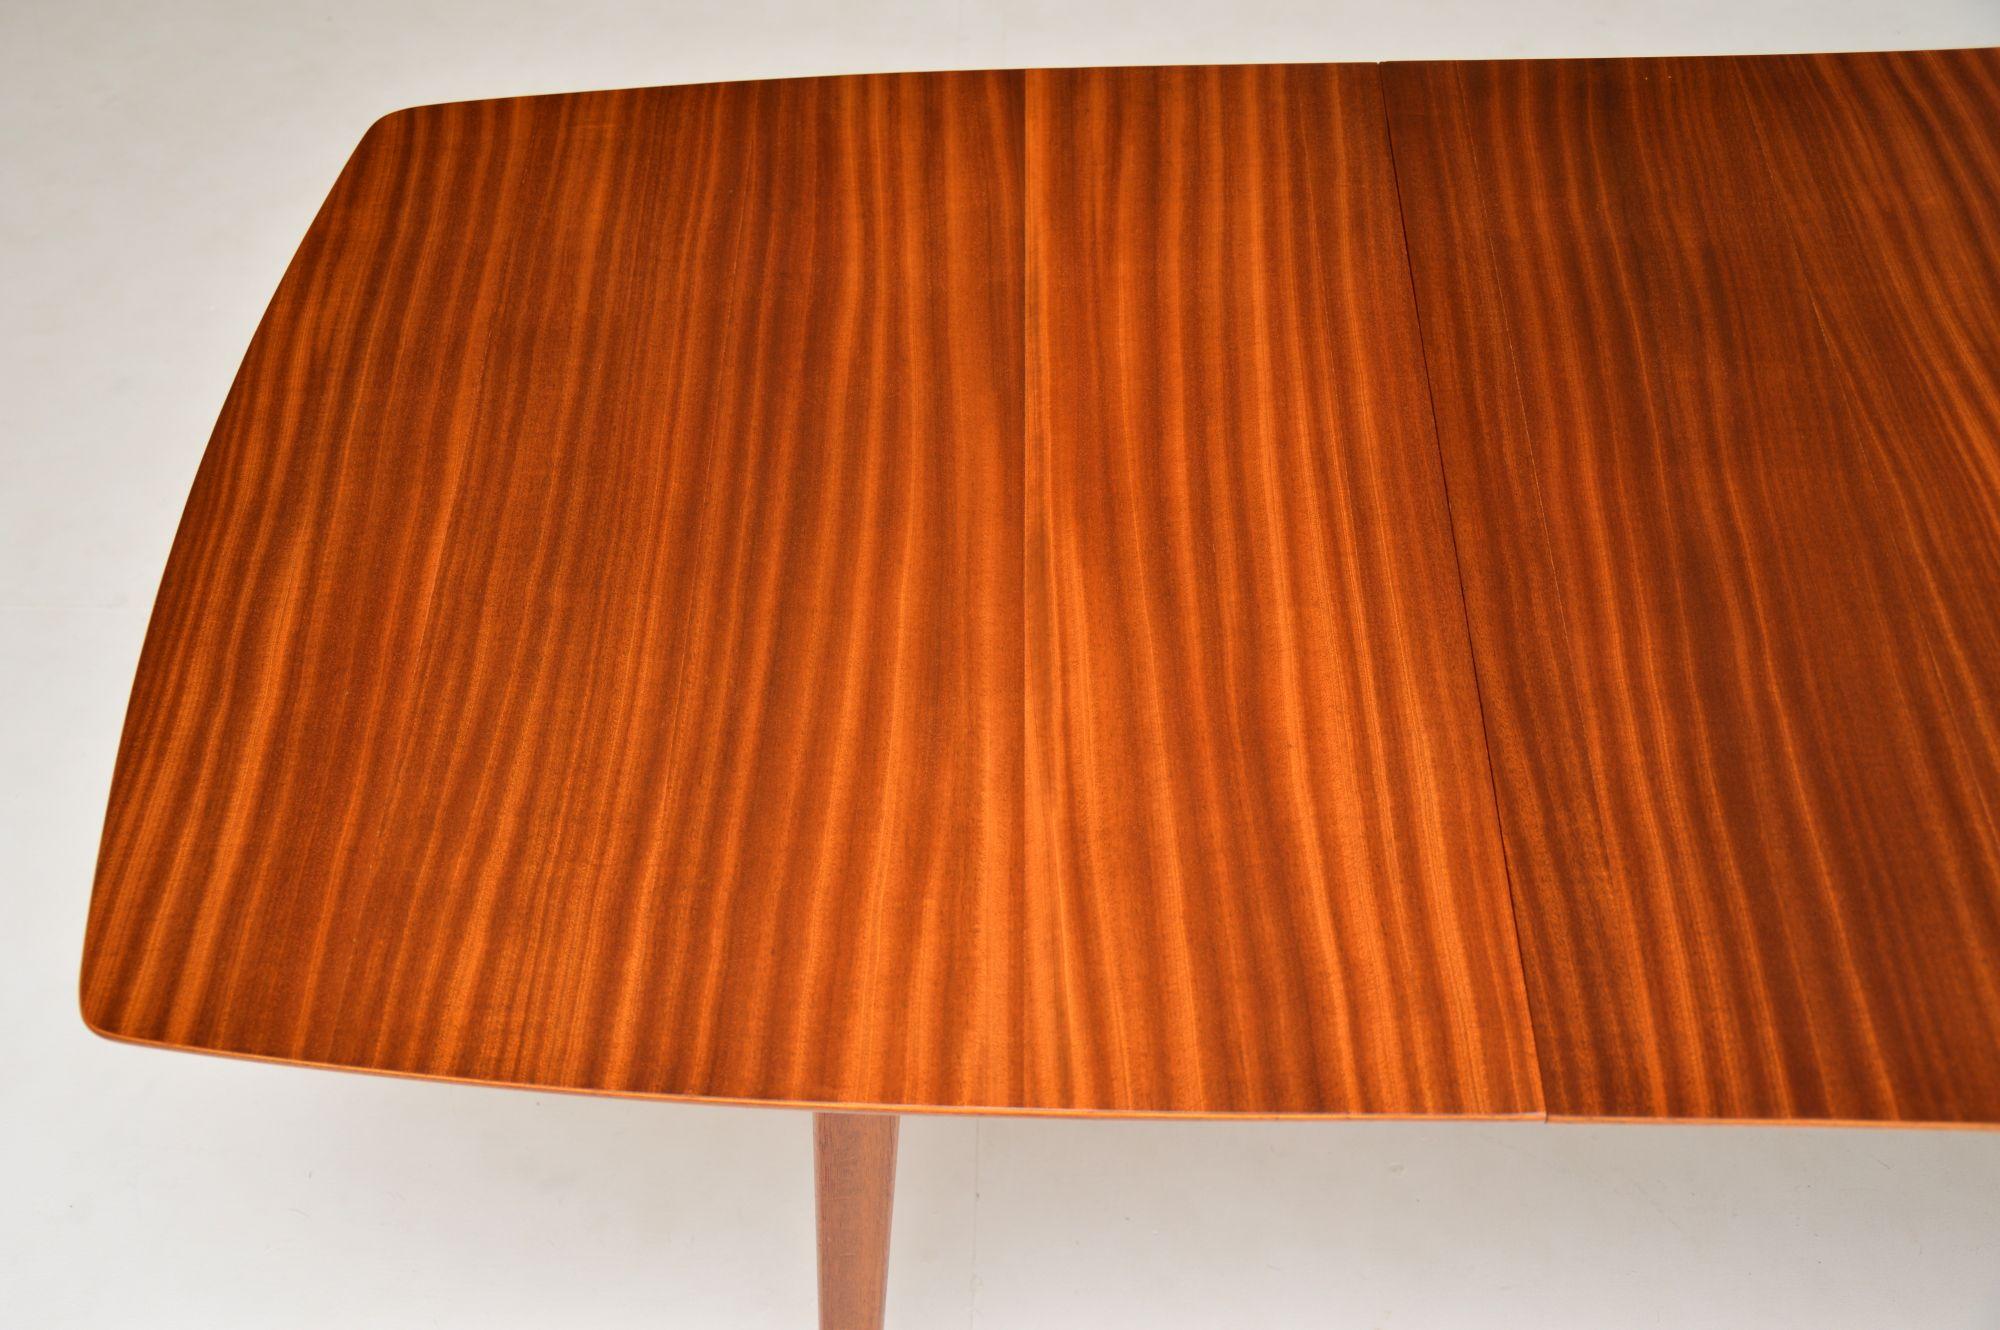 British 1950s Vintage Mahogany Dining Table by Peter Hayward for Vanson